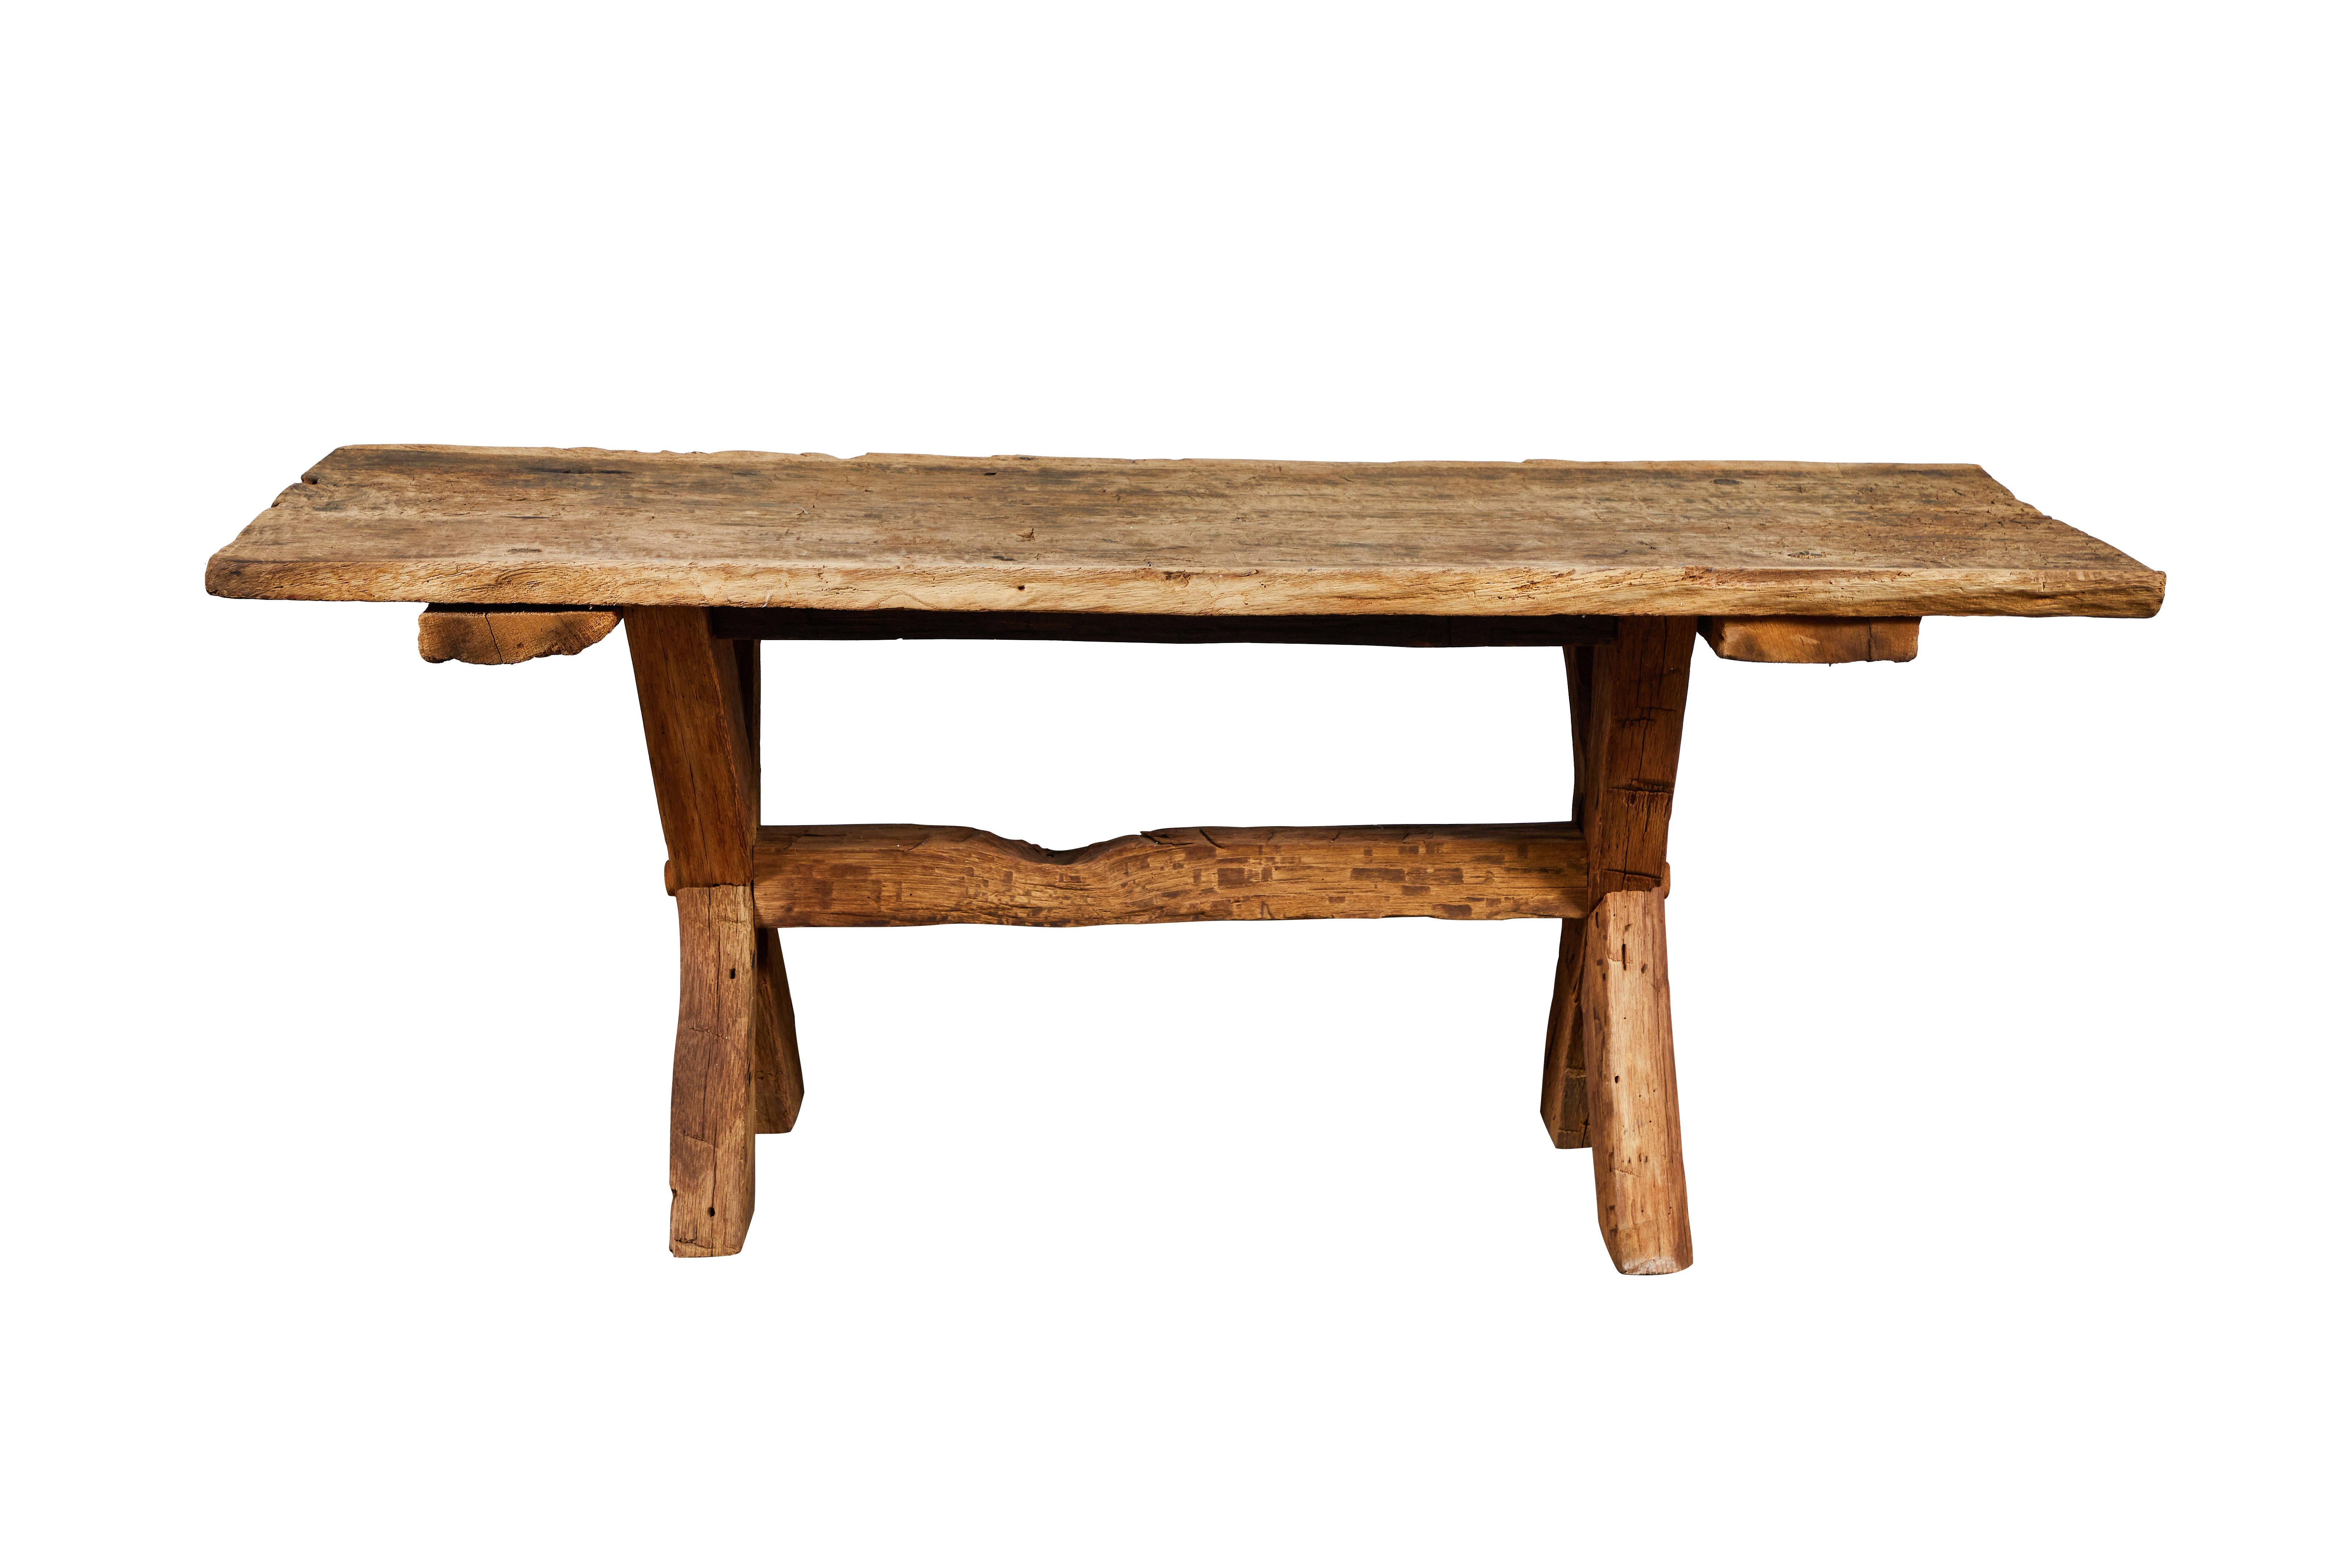 Rugged and chunky rustic trestle base console table, has a thin top. The piece can be used as a communal table or used as a console.